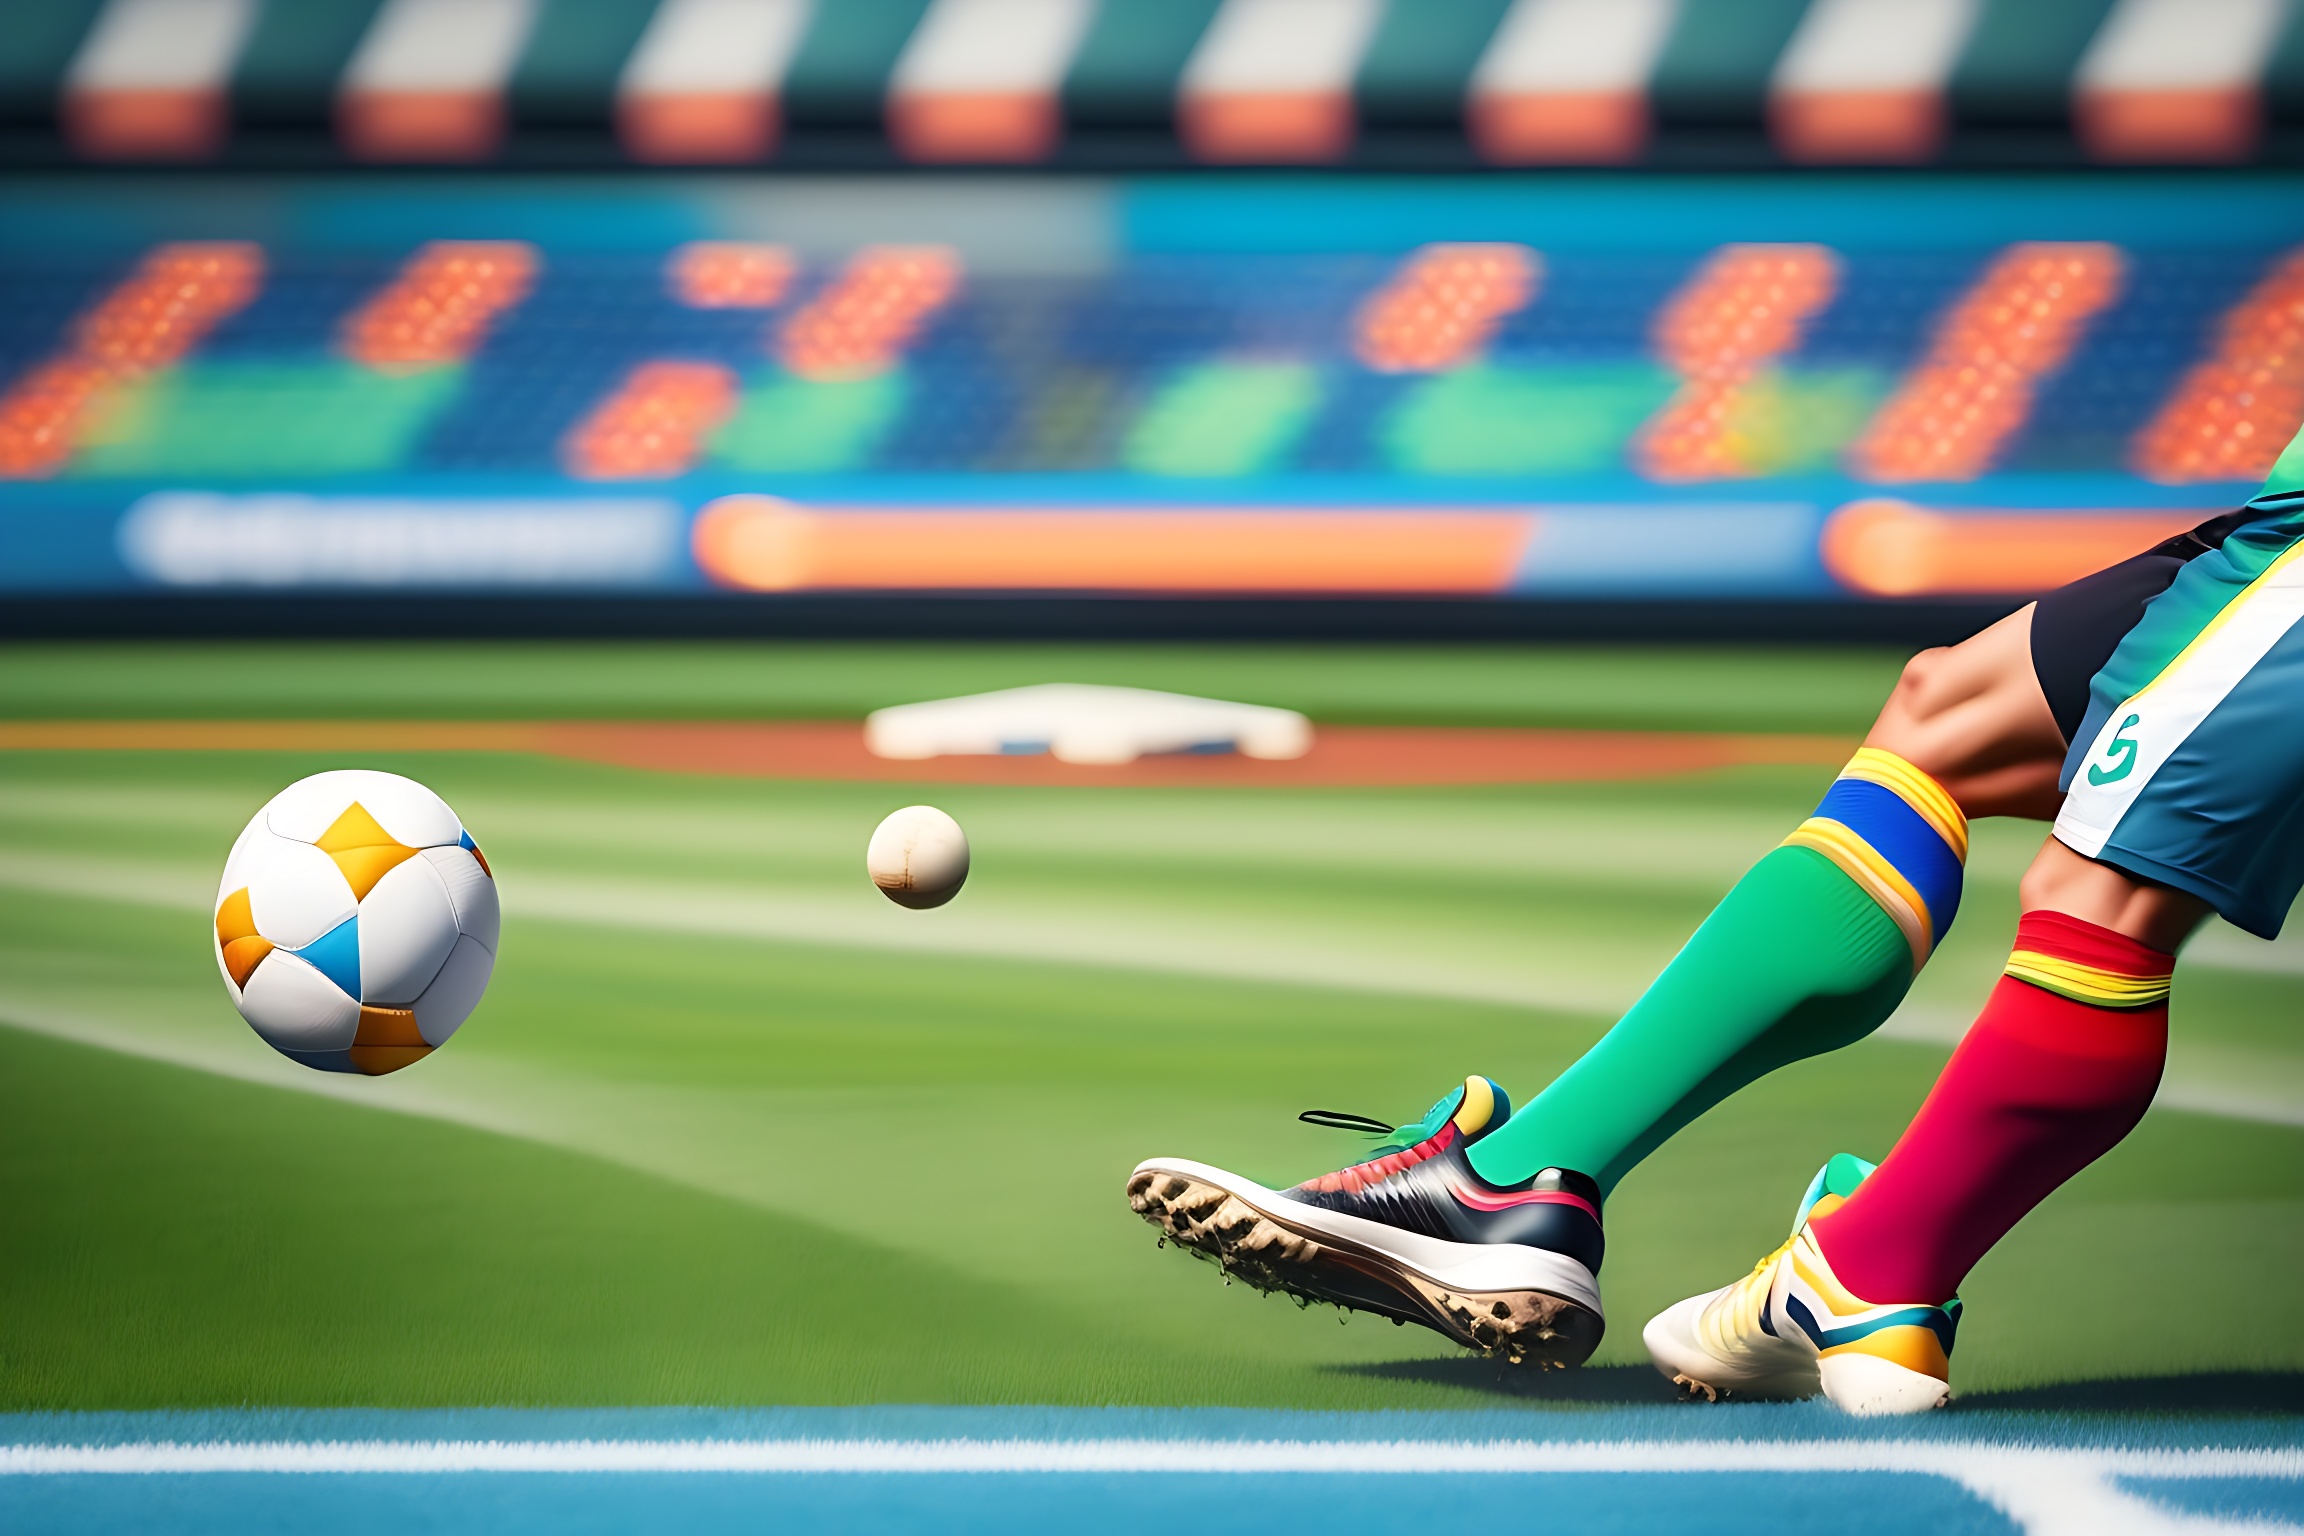 5 Best Baseball Socks for Knickers in 2023 (The Ultimate Guide)